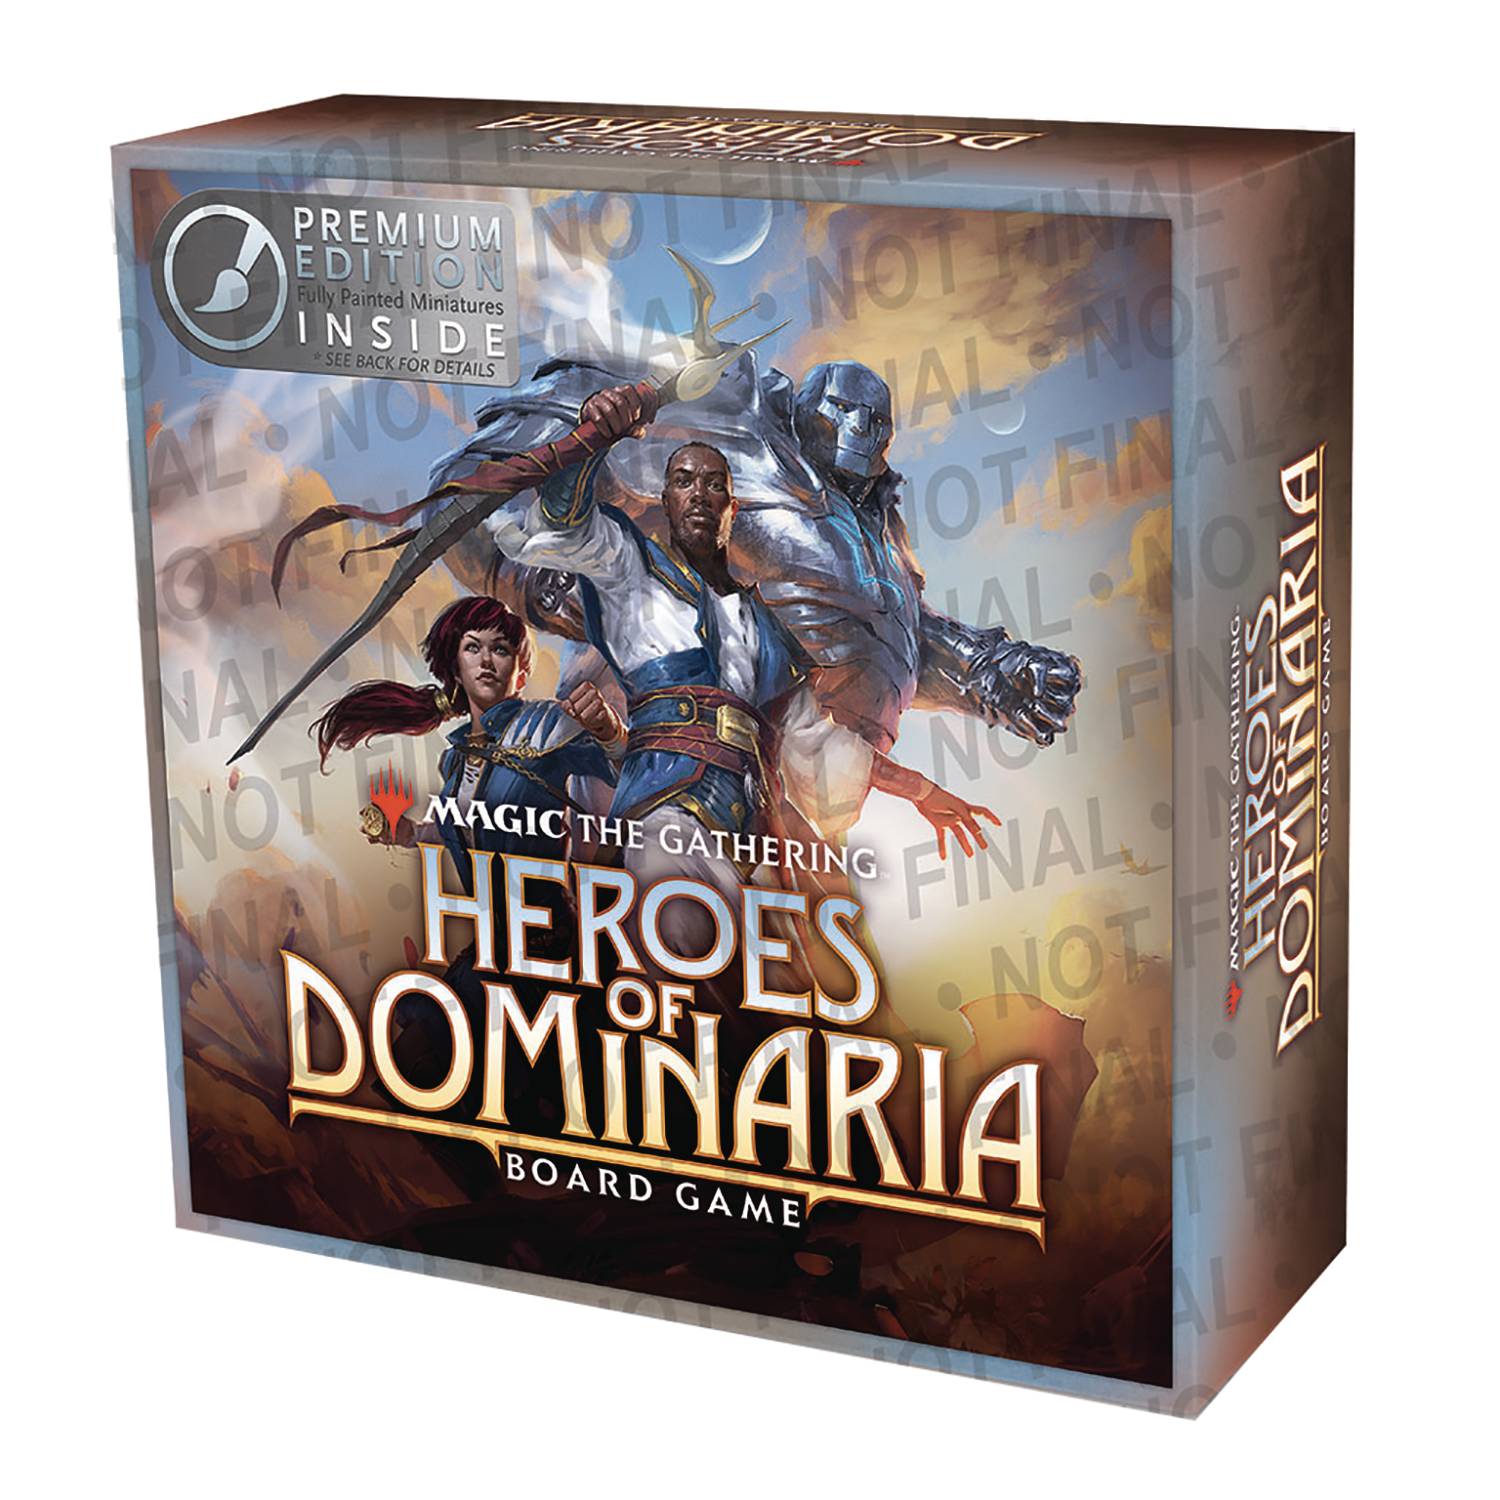 Magic the Gathering Heroes of Dominaria Board Game Premium Edition